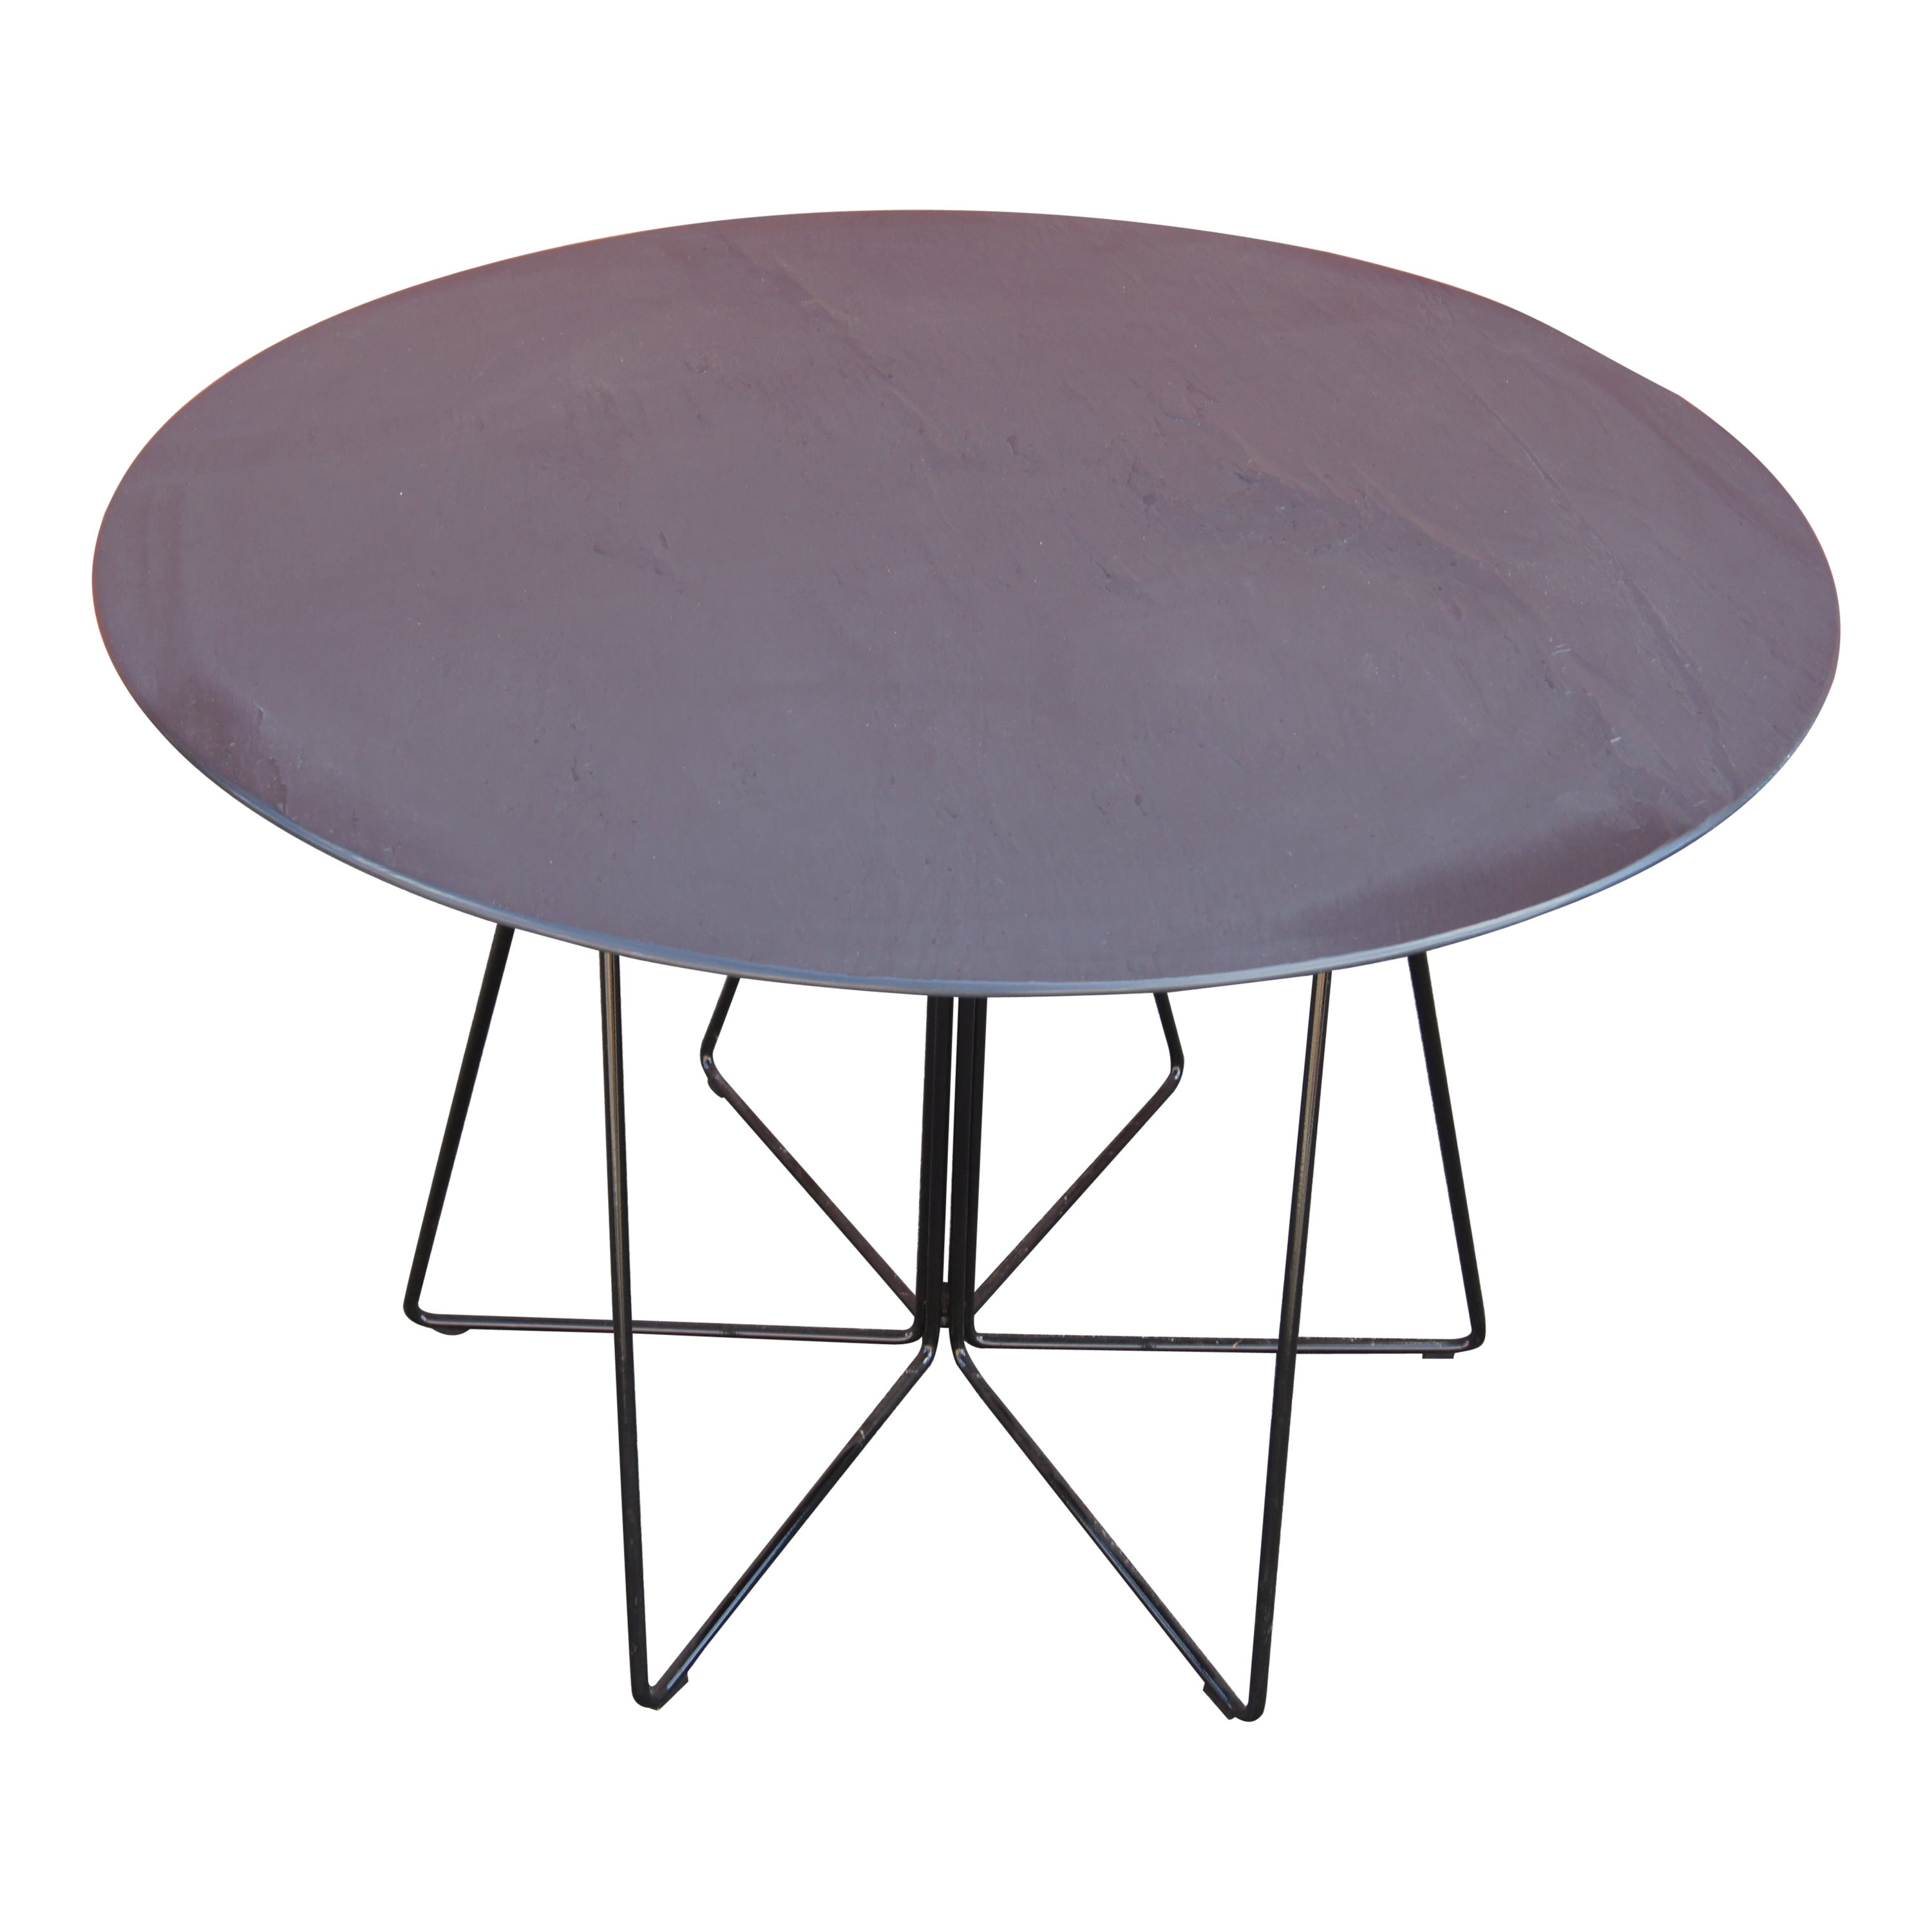 Slate PaperClip Cafe Table by Lella and Massimo Vignelli for Knoll For Sale